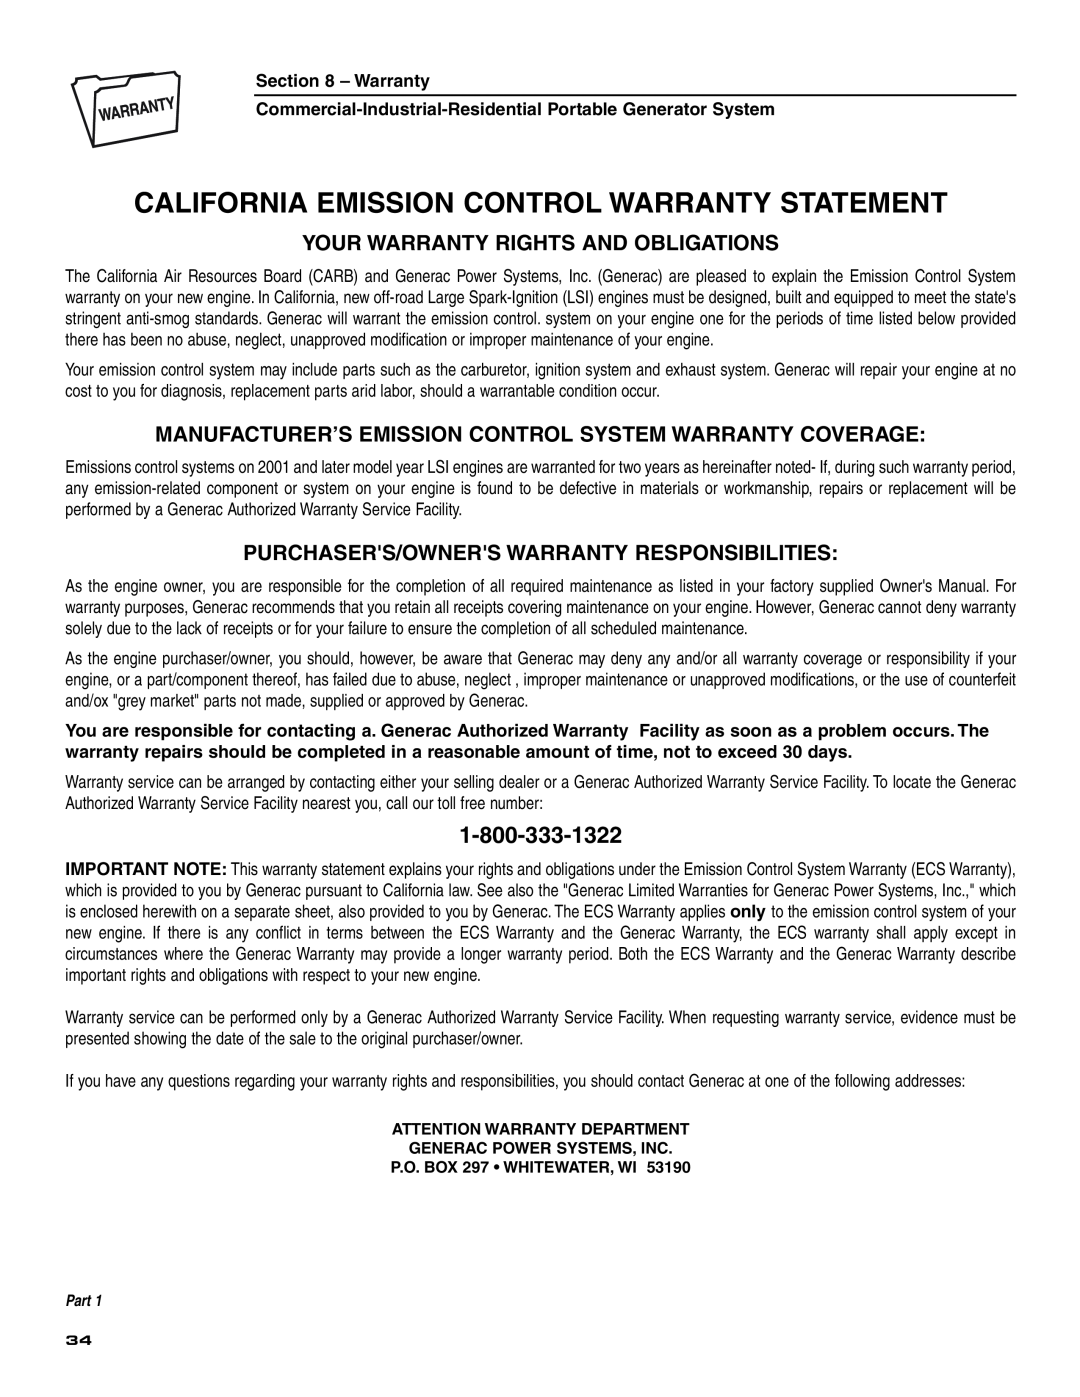 Generac 004451 ,004582 owner manual California Emission Control Warranty Statement, Your Warranty Rights And Obligations 